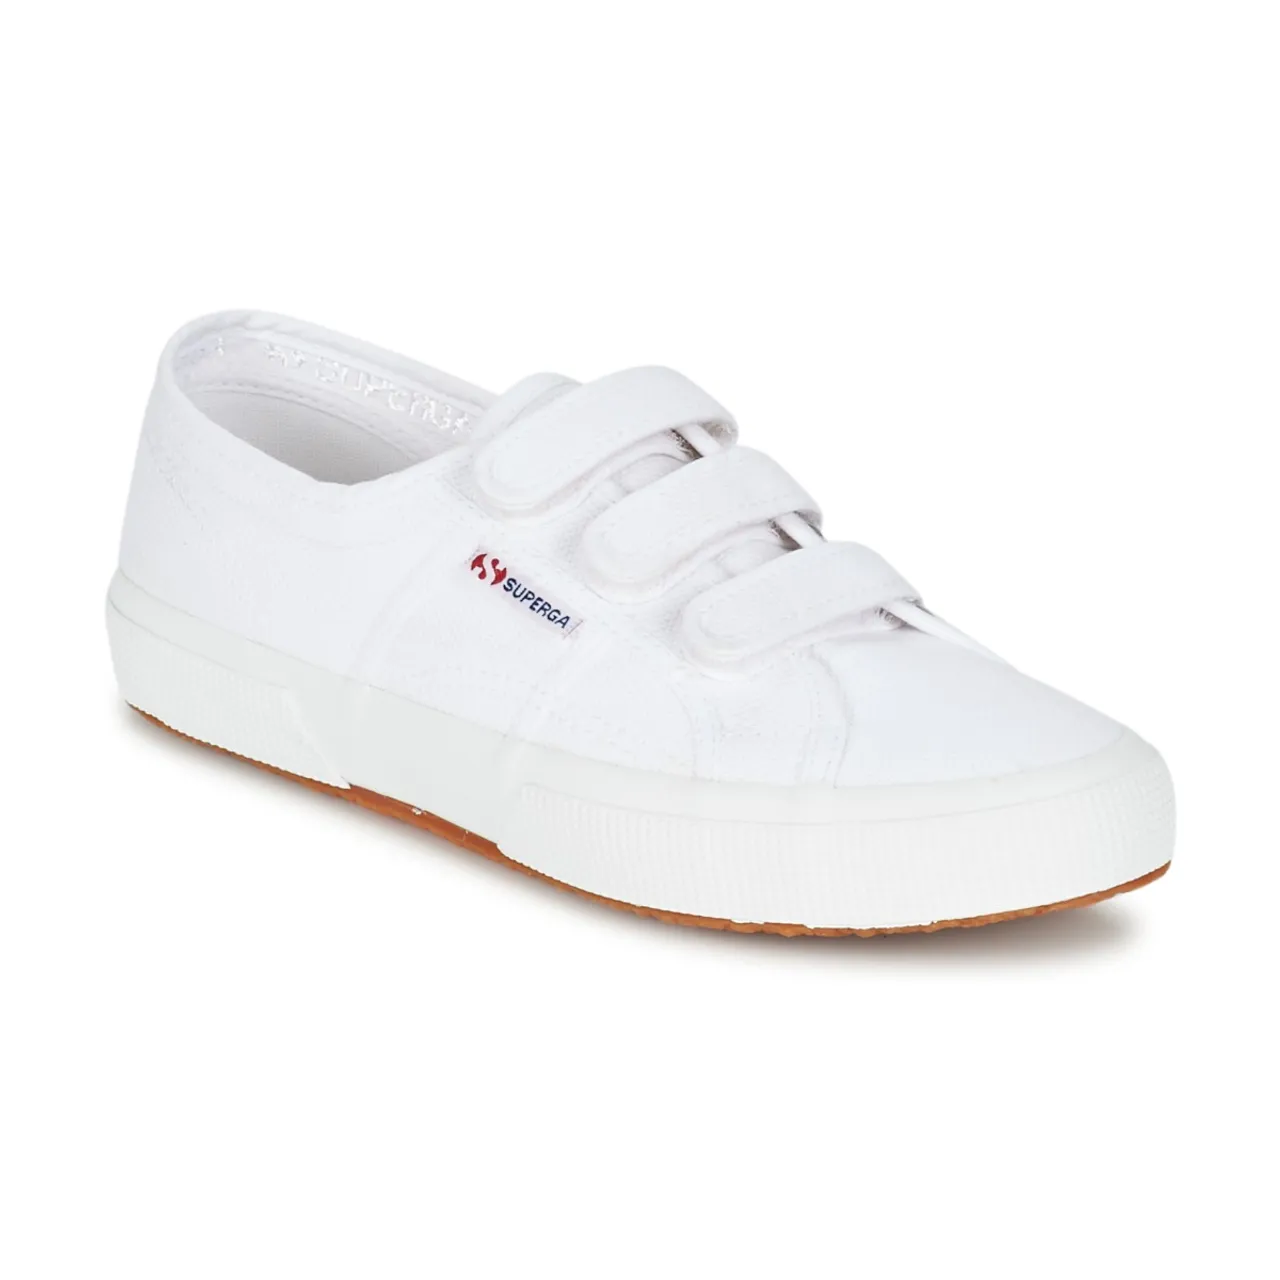 Superga  2750 COT3 VEL U  women's Shoes (Trainers) in White